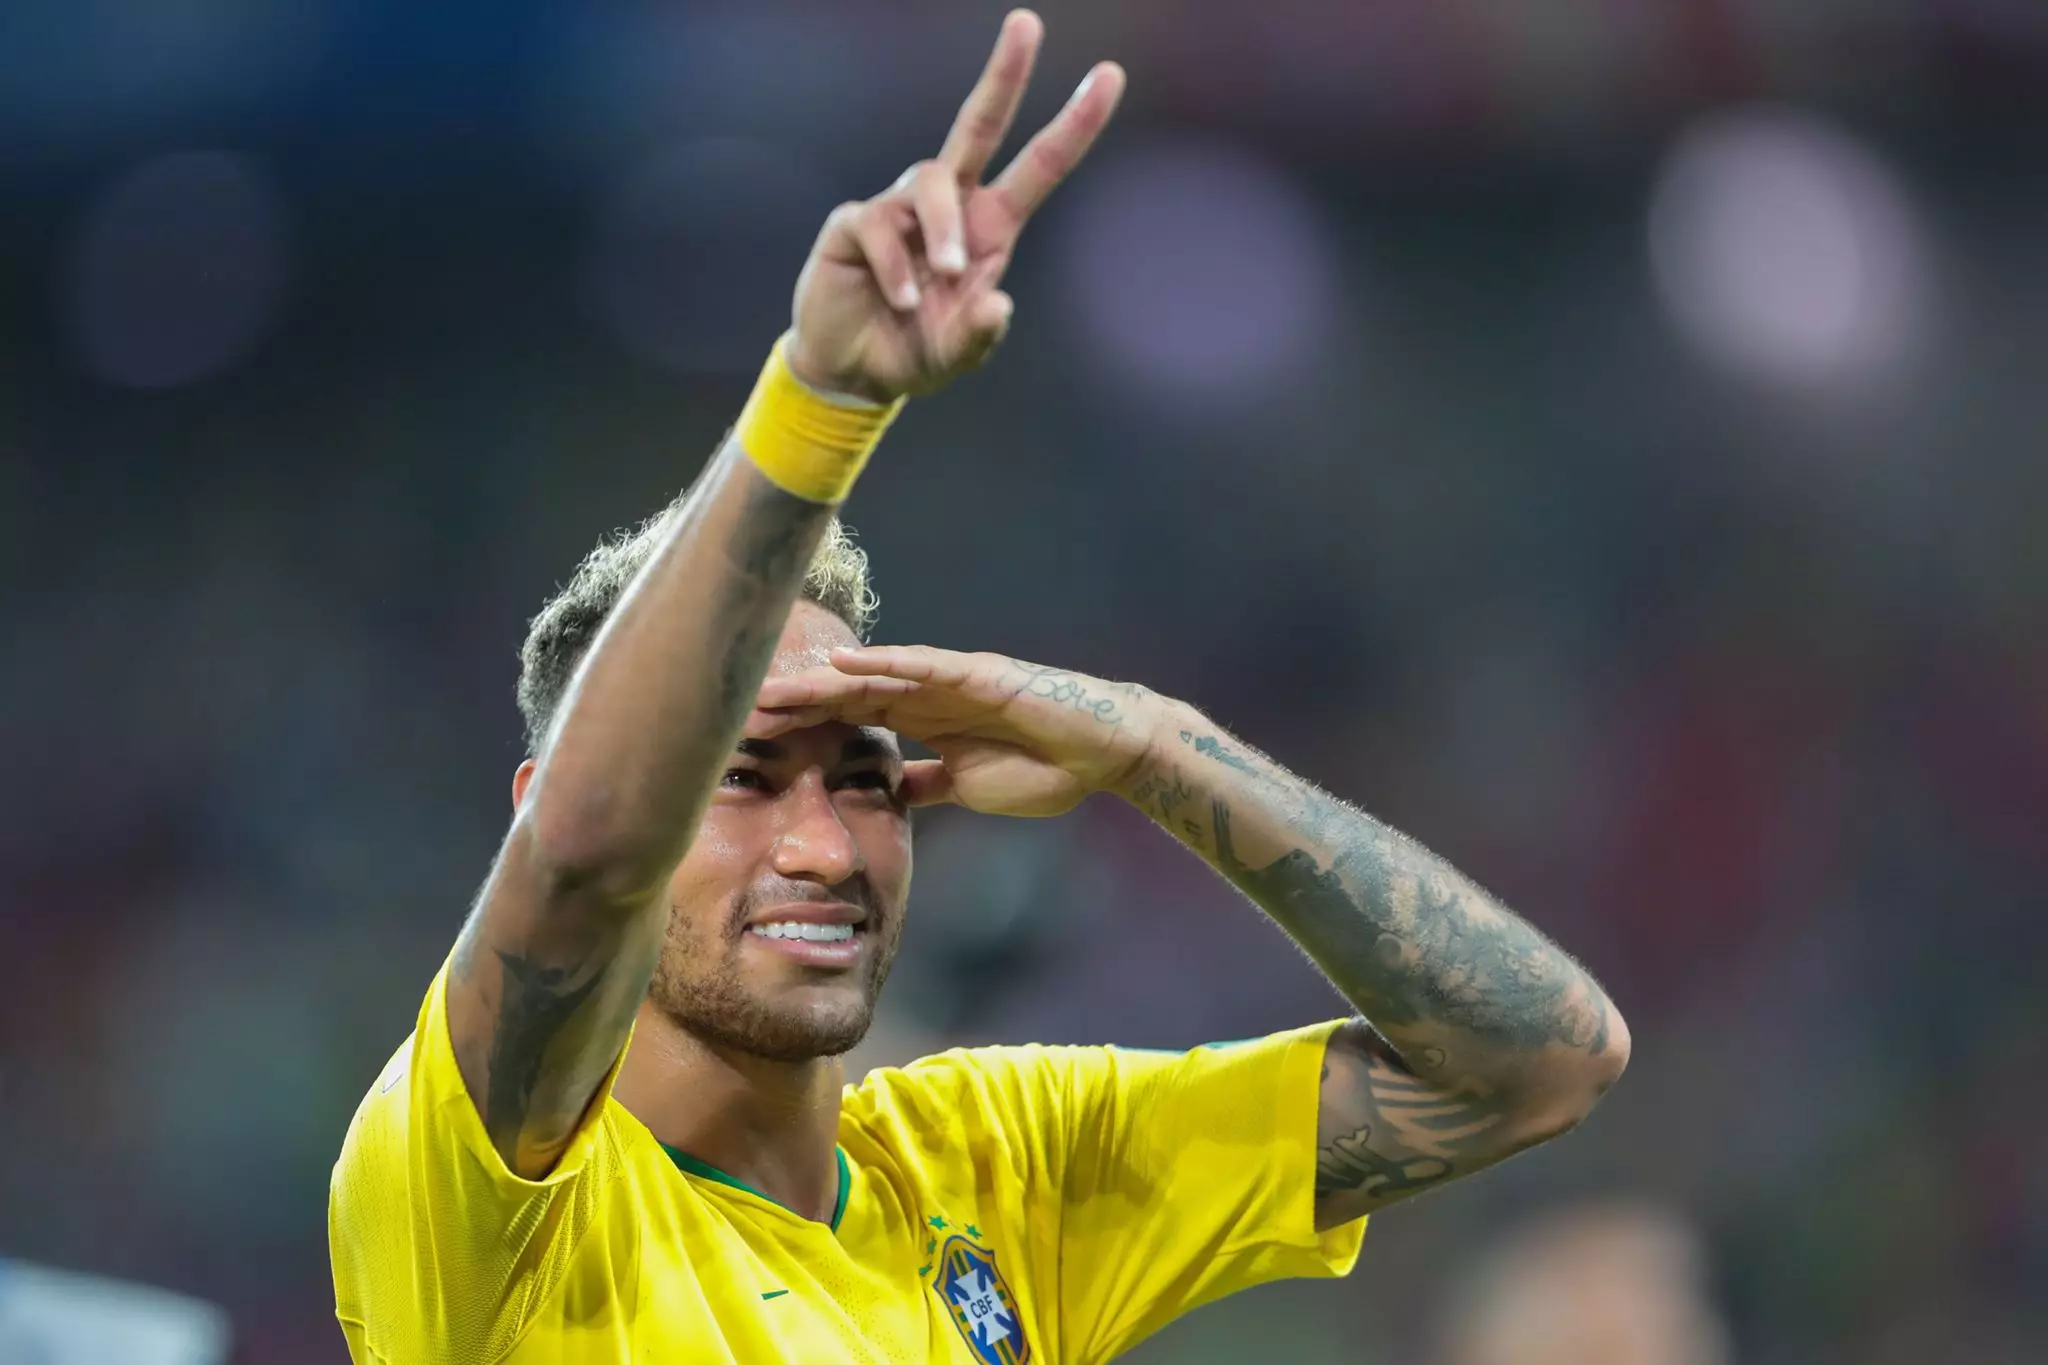 England will avoid Neymar and Brazil until the final. Image: PA Images